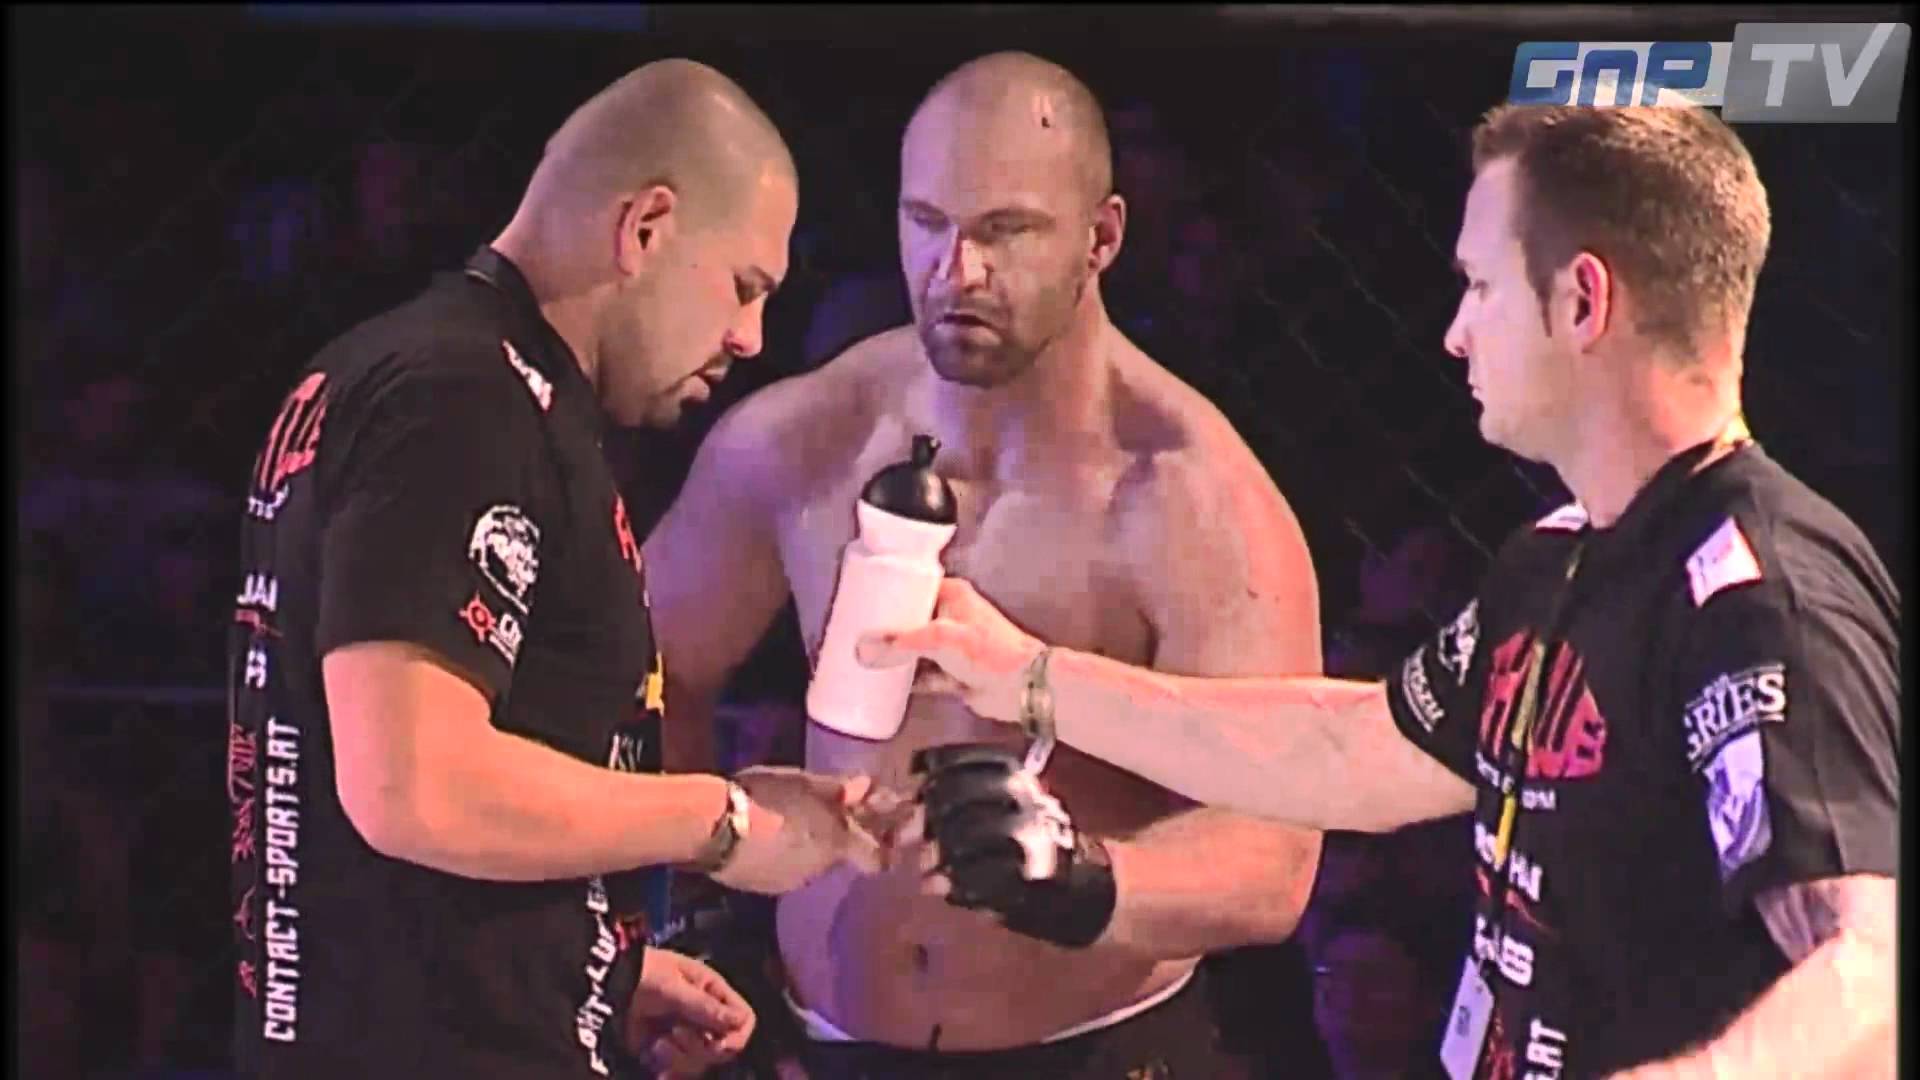 Cage Fight Series 6: Jürgen Dolch vs. Chris Mahle Full Fight MMA Video1920 x 1080